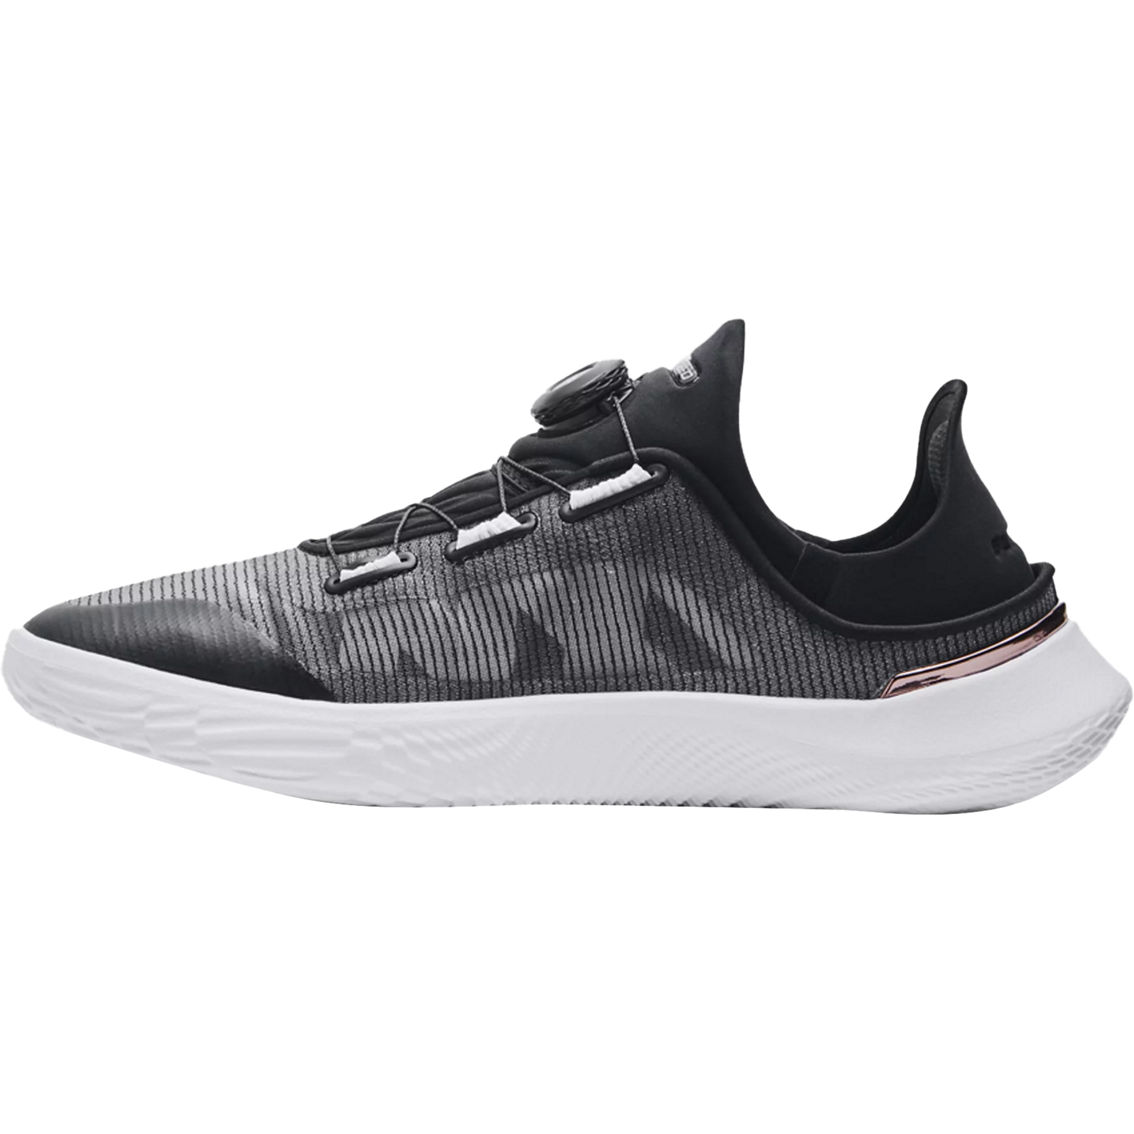 Under Armour Slipspeed Mesh Trainers | Men's Athletic Shoes | Shoes ...